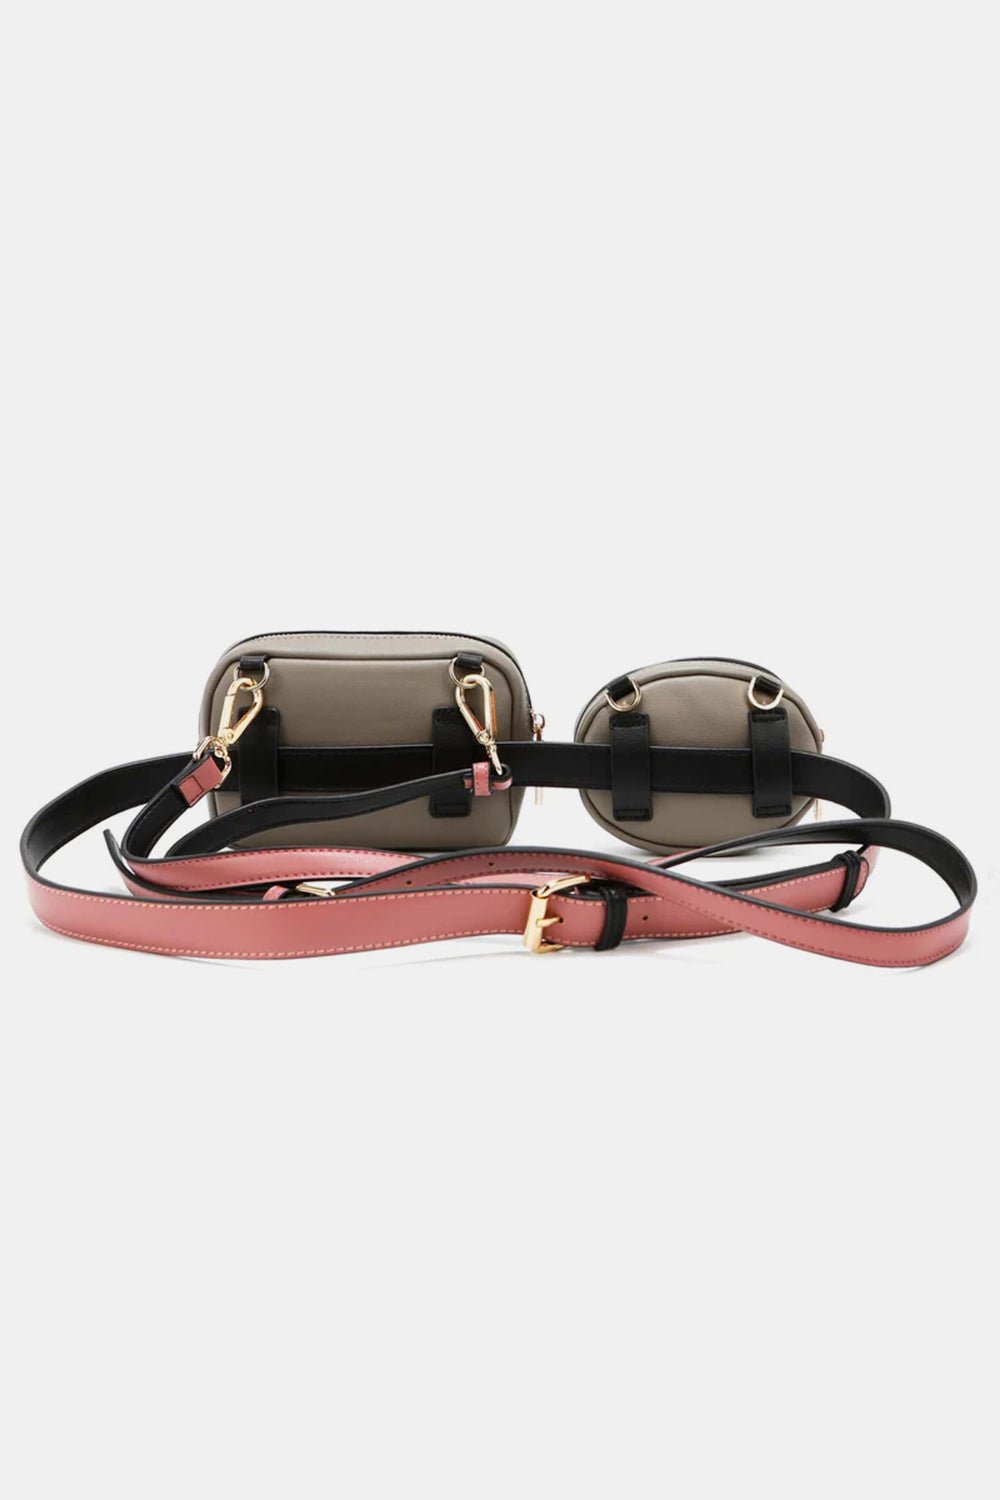 Vegan Leather Double Pouch Fanny PackFanny PackNicole Lee USA